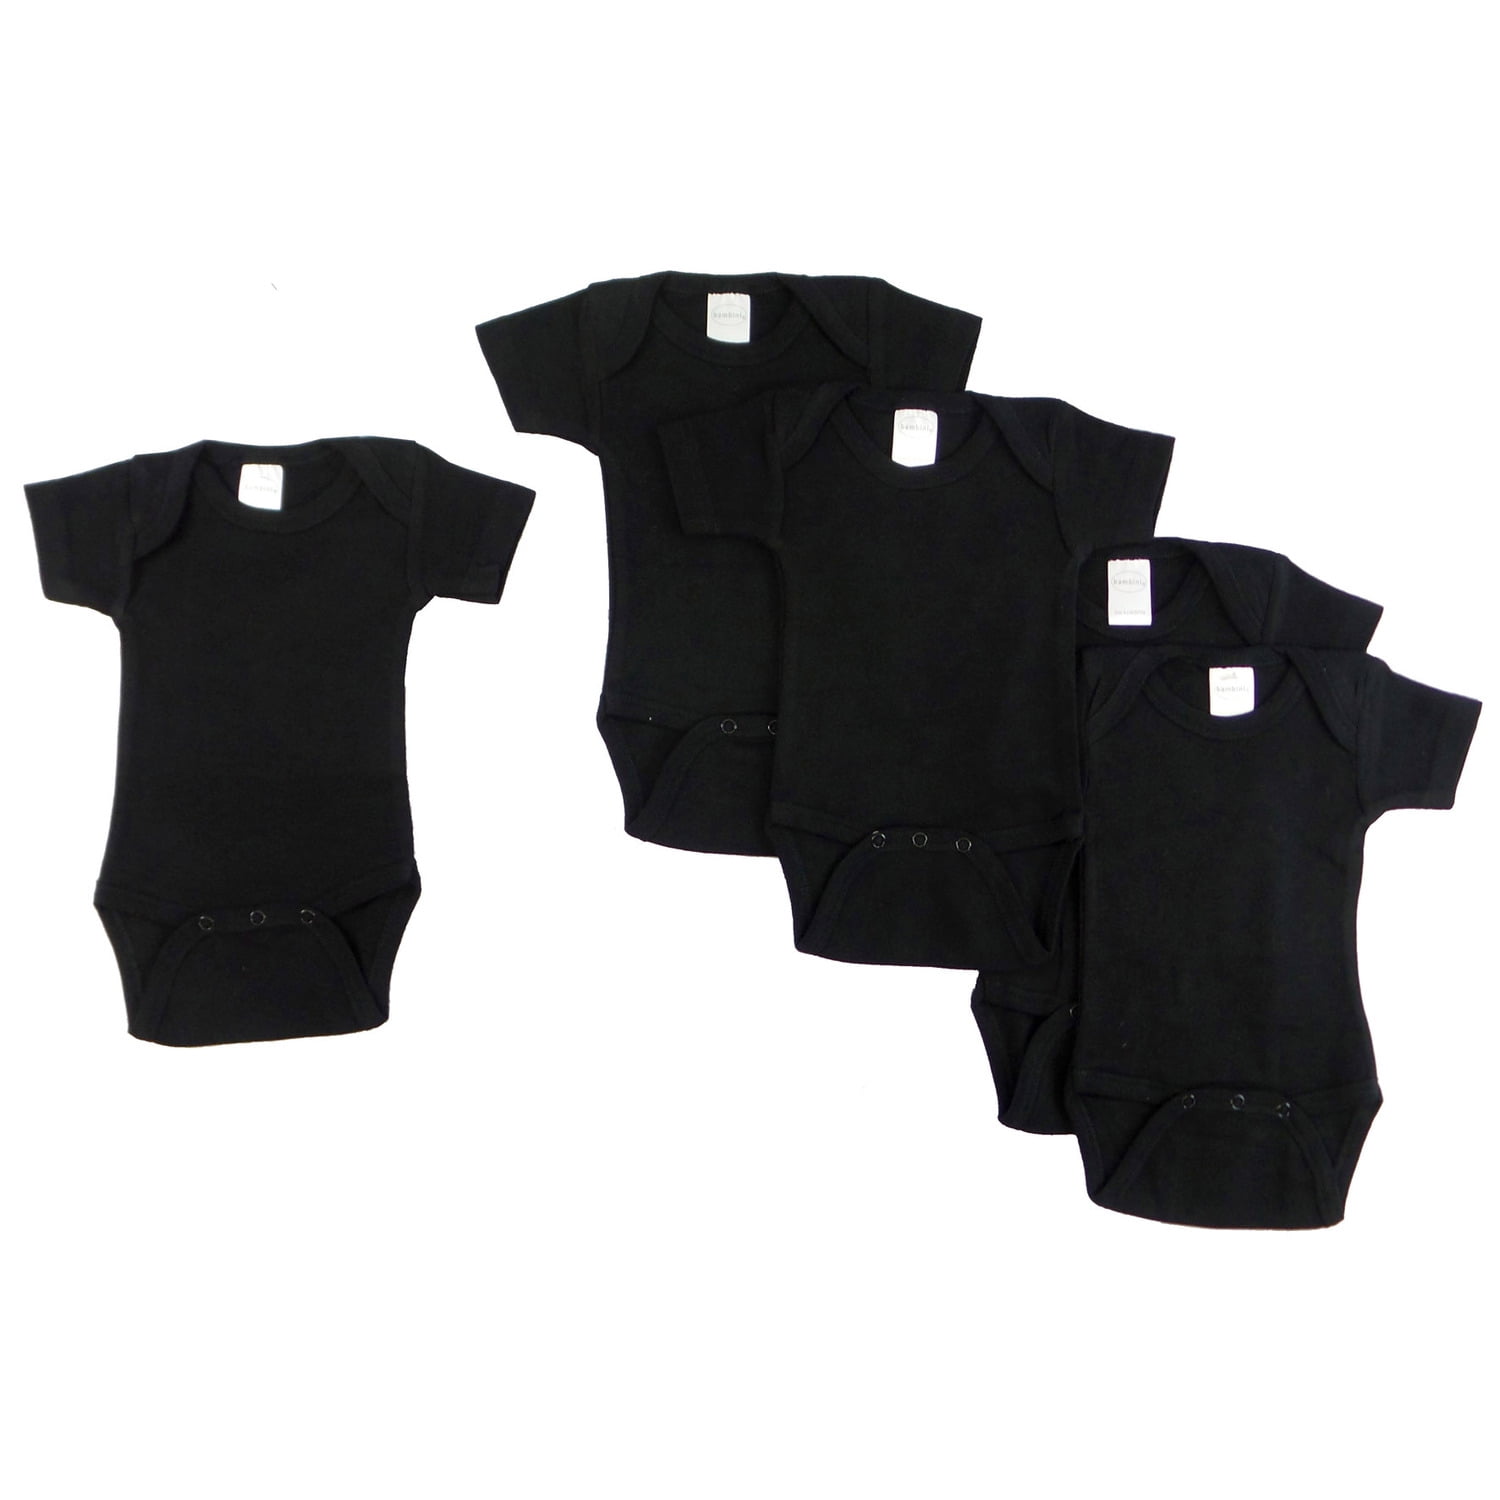 Short Sleeve - Black, Small - Pack Of 5